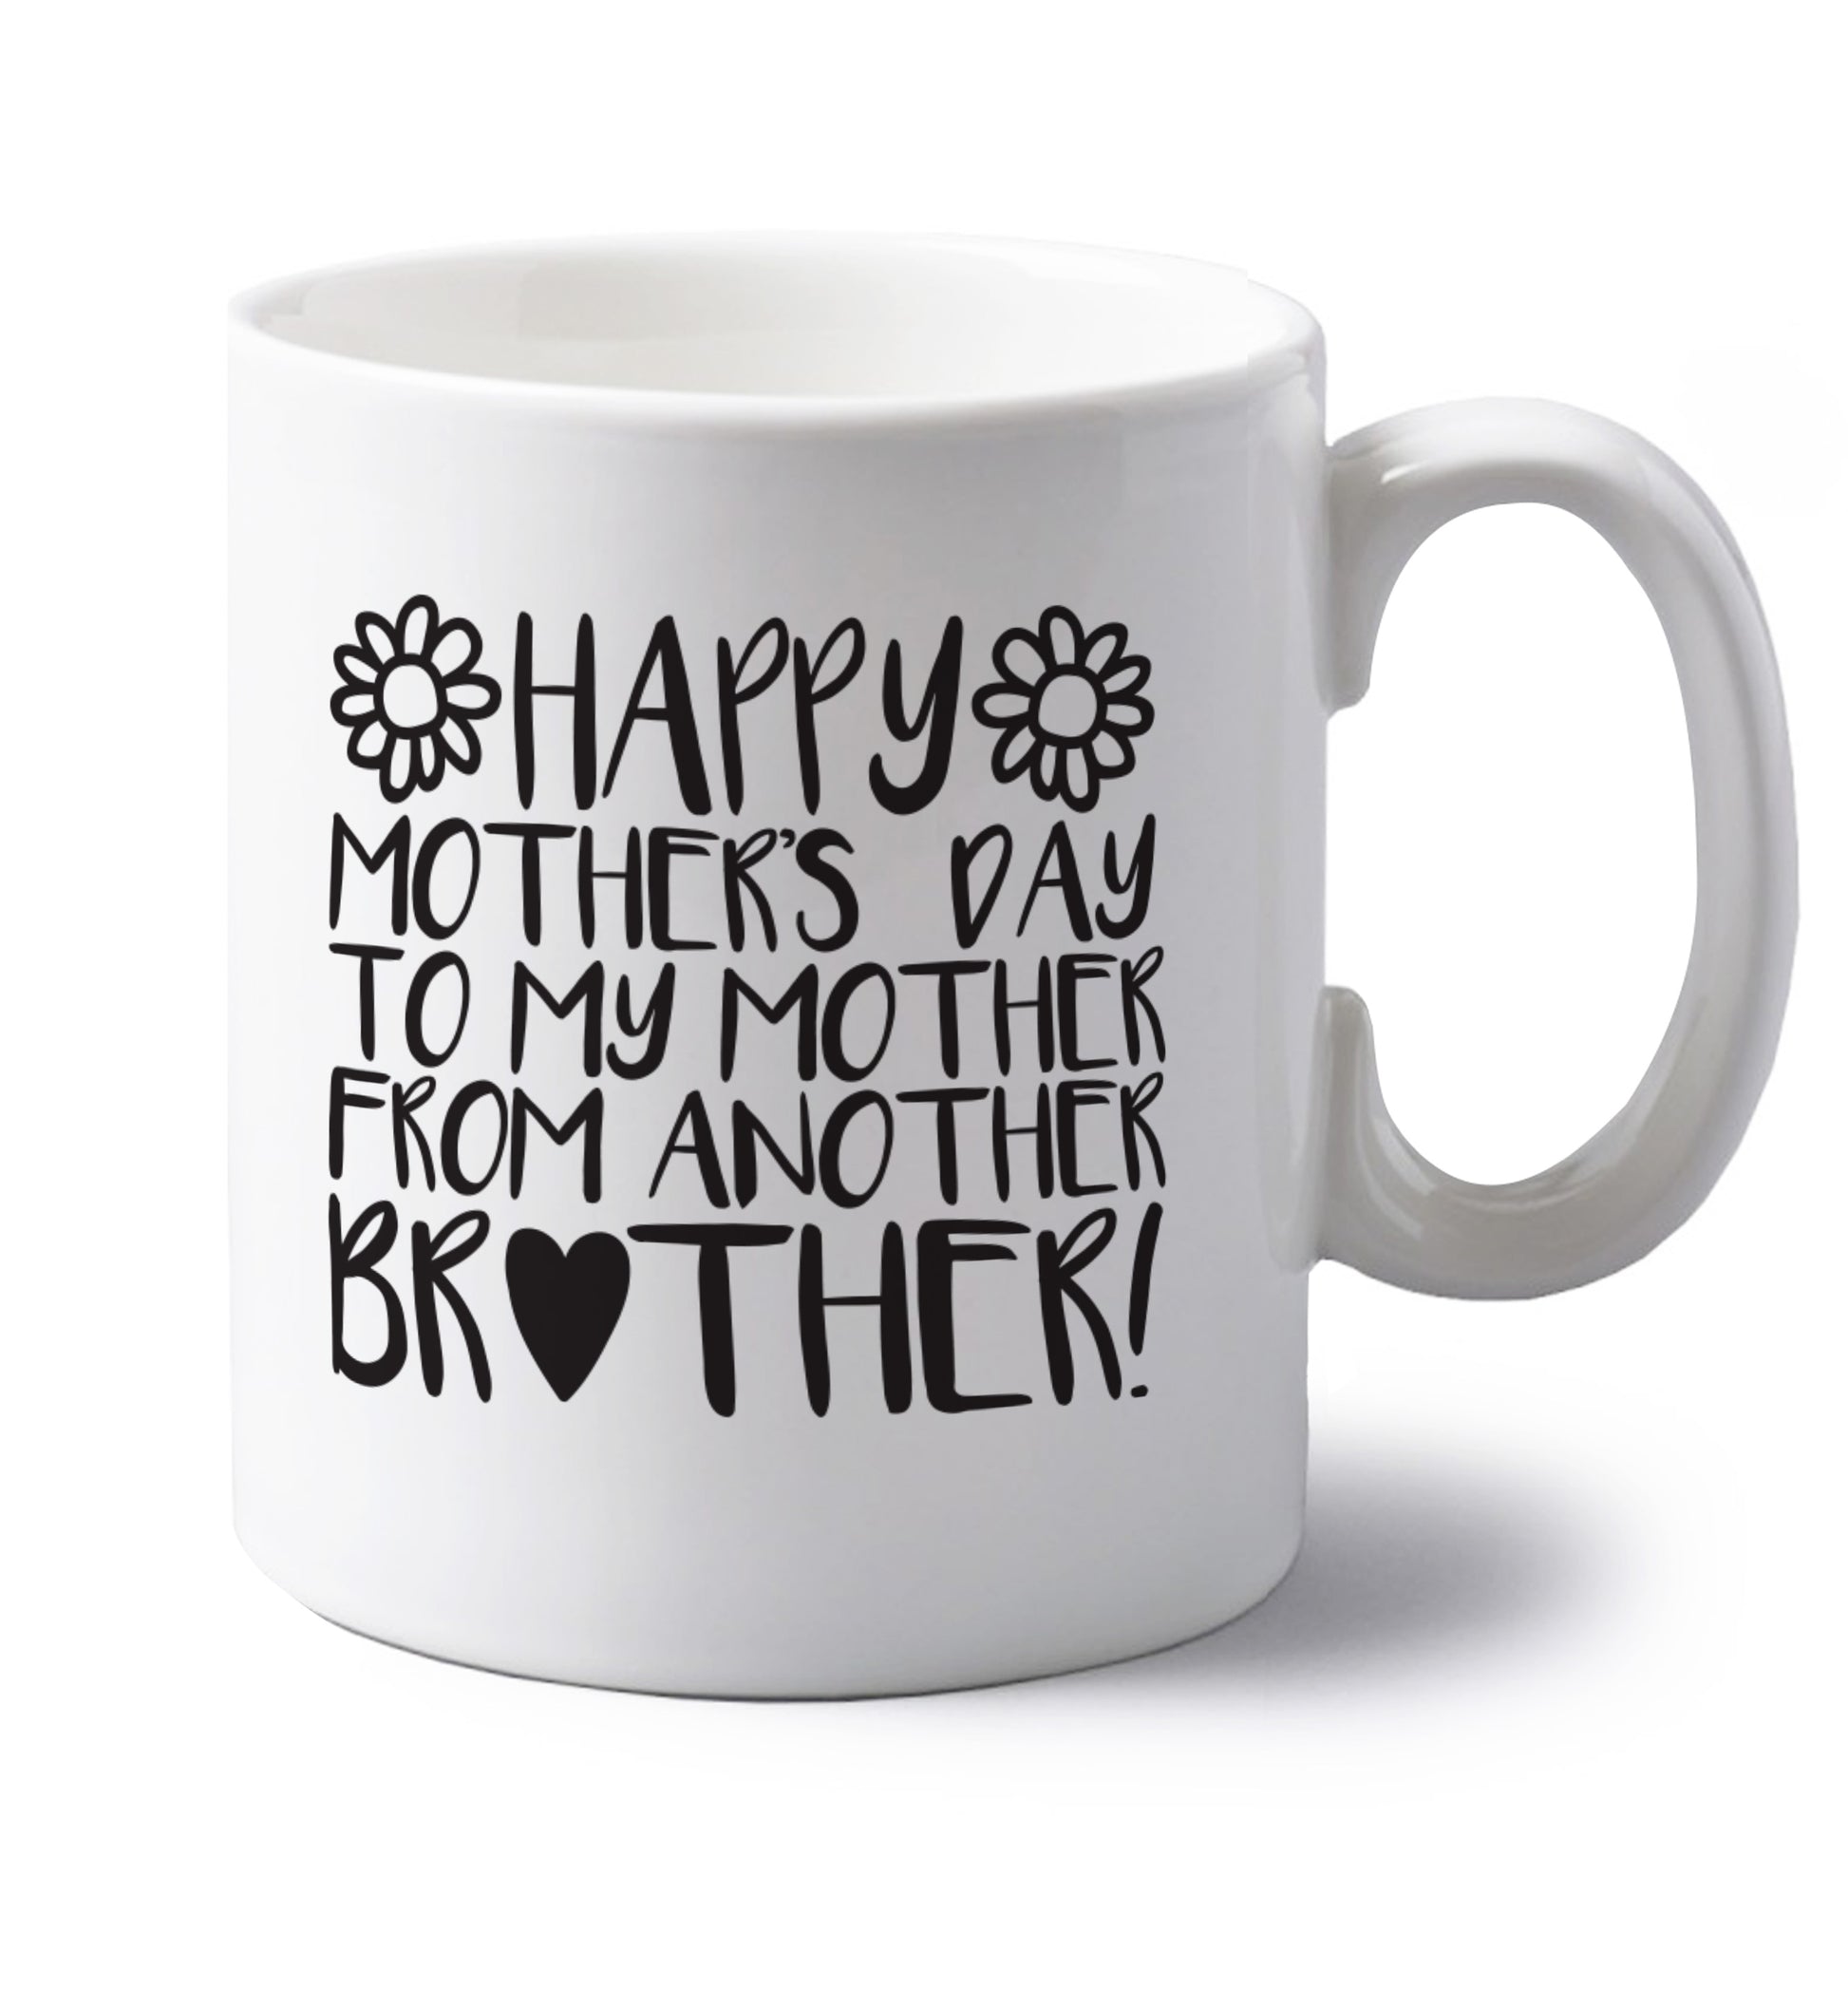 Happy mother's day to my mother from another brother left handed white ceramic mug 